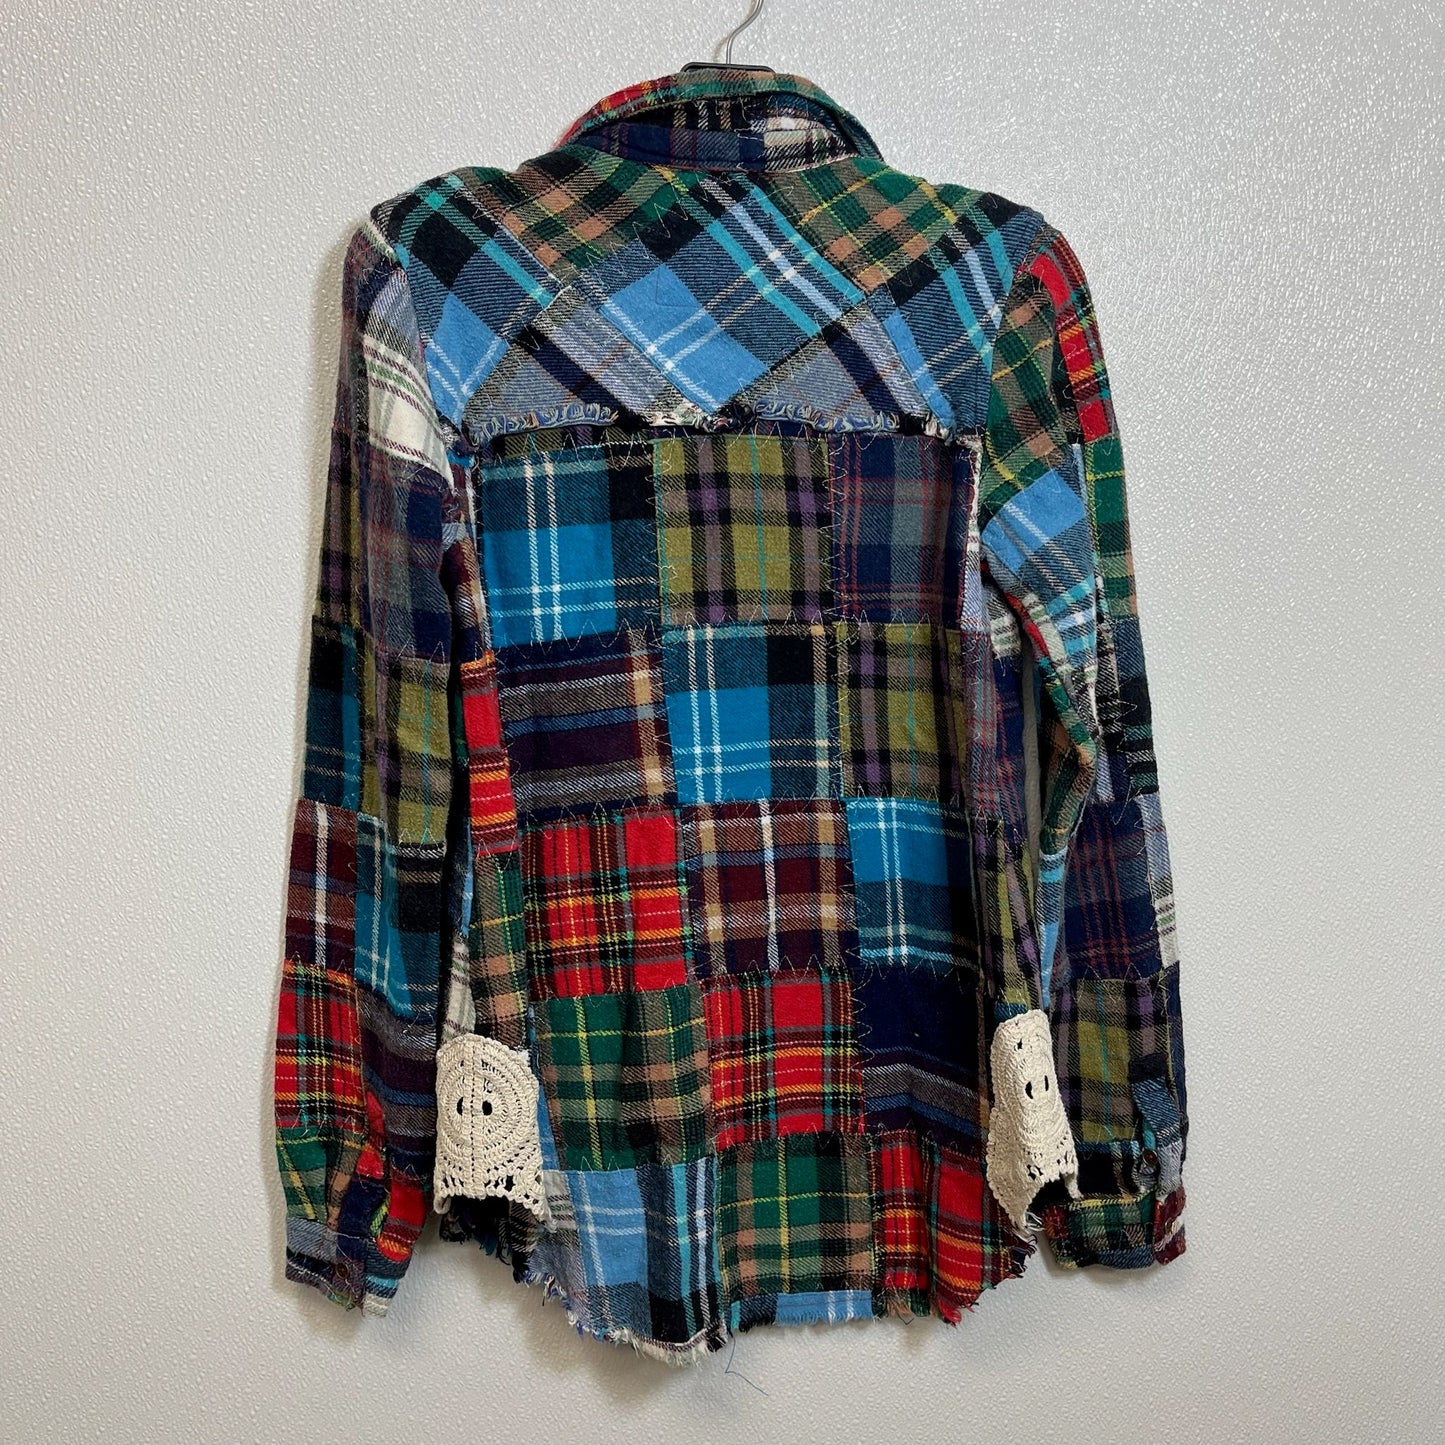 Plaid Top Long Sleeve We The Free, Size S